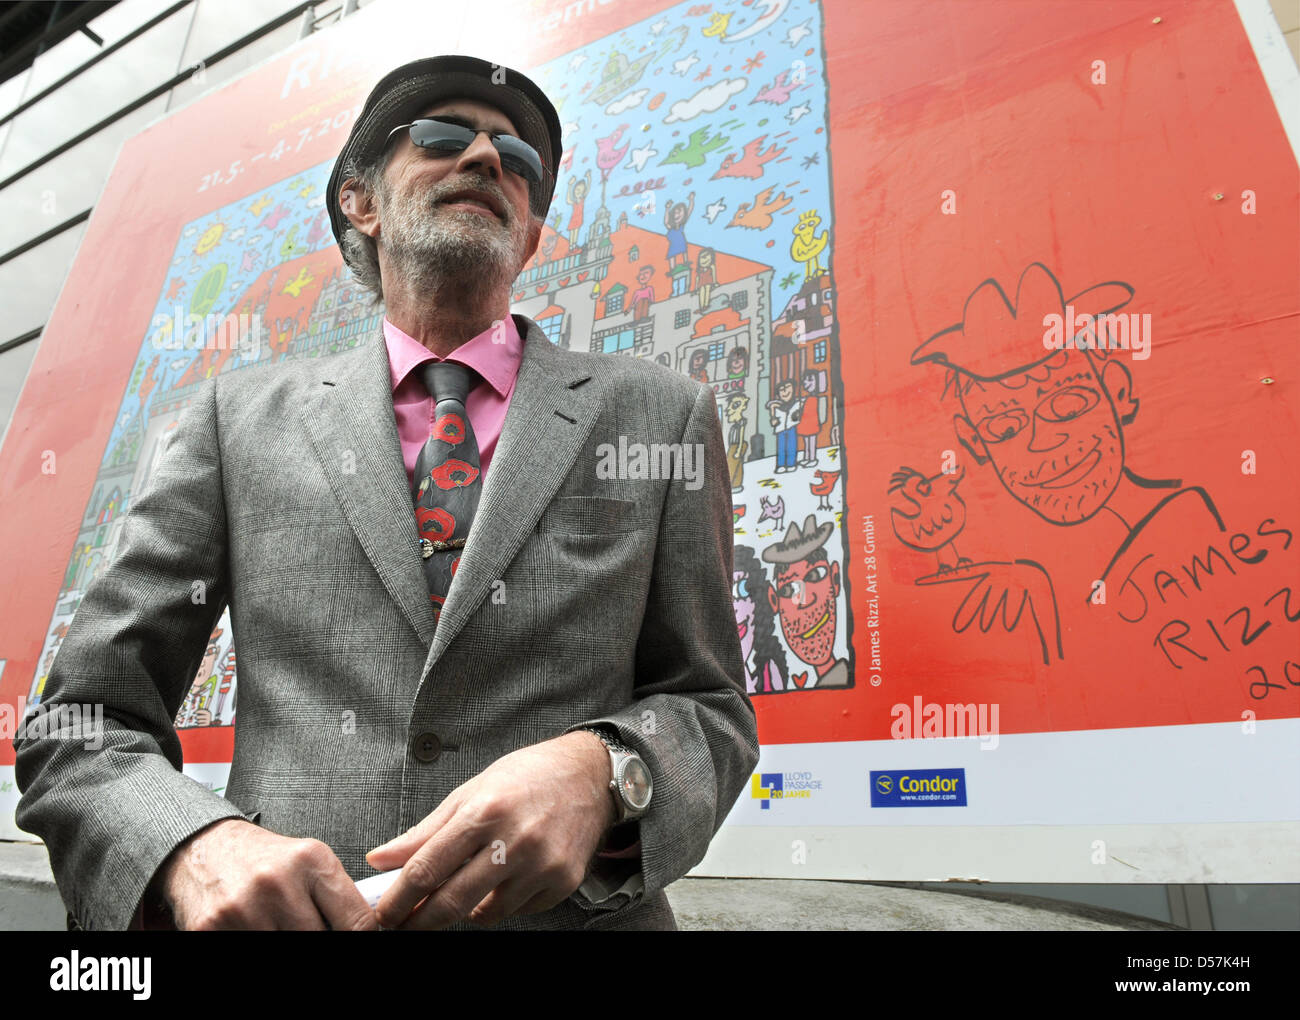 US pop art artist James Rizzi smiles in front of an advert banner for his  exhibition 'Rizzi's World' in Bremen, Germany, 20 May 2010. The exhibition  puts more than 1,200 exhibits of